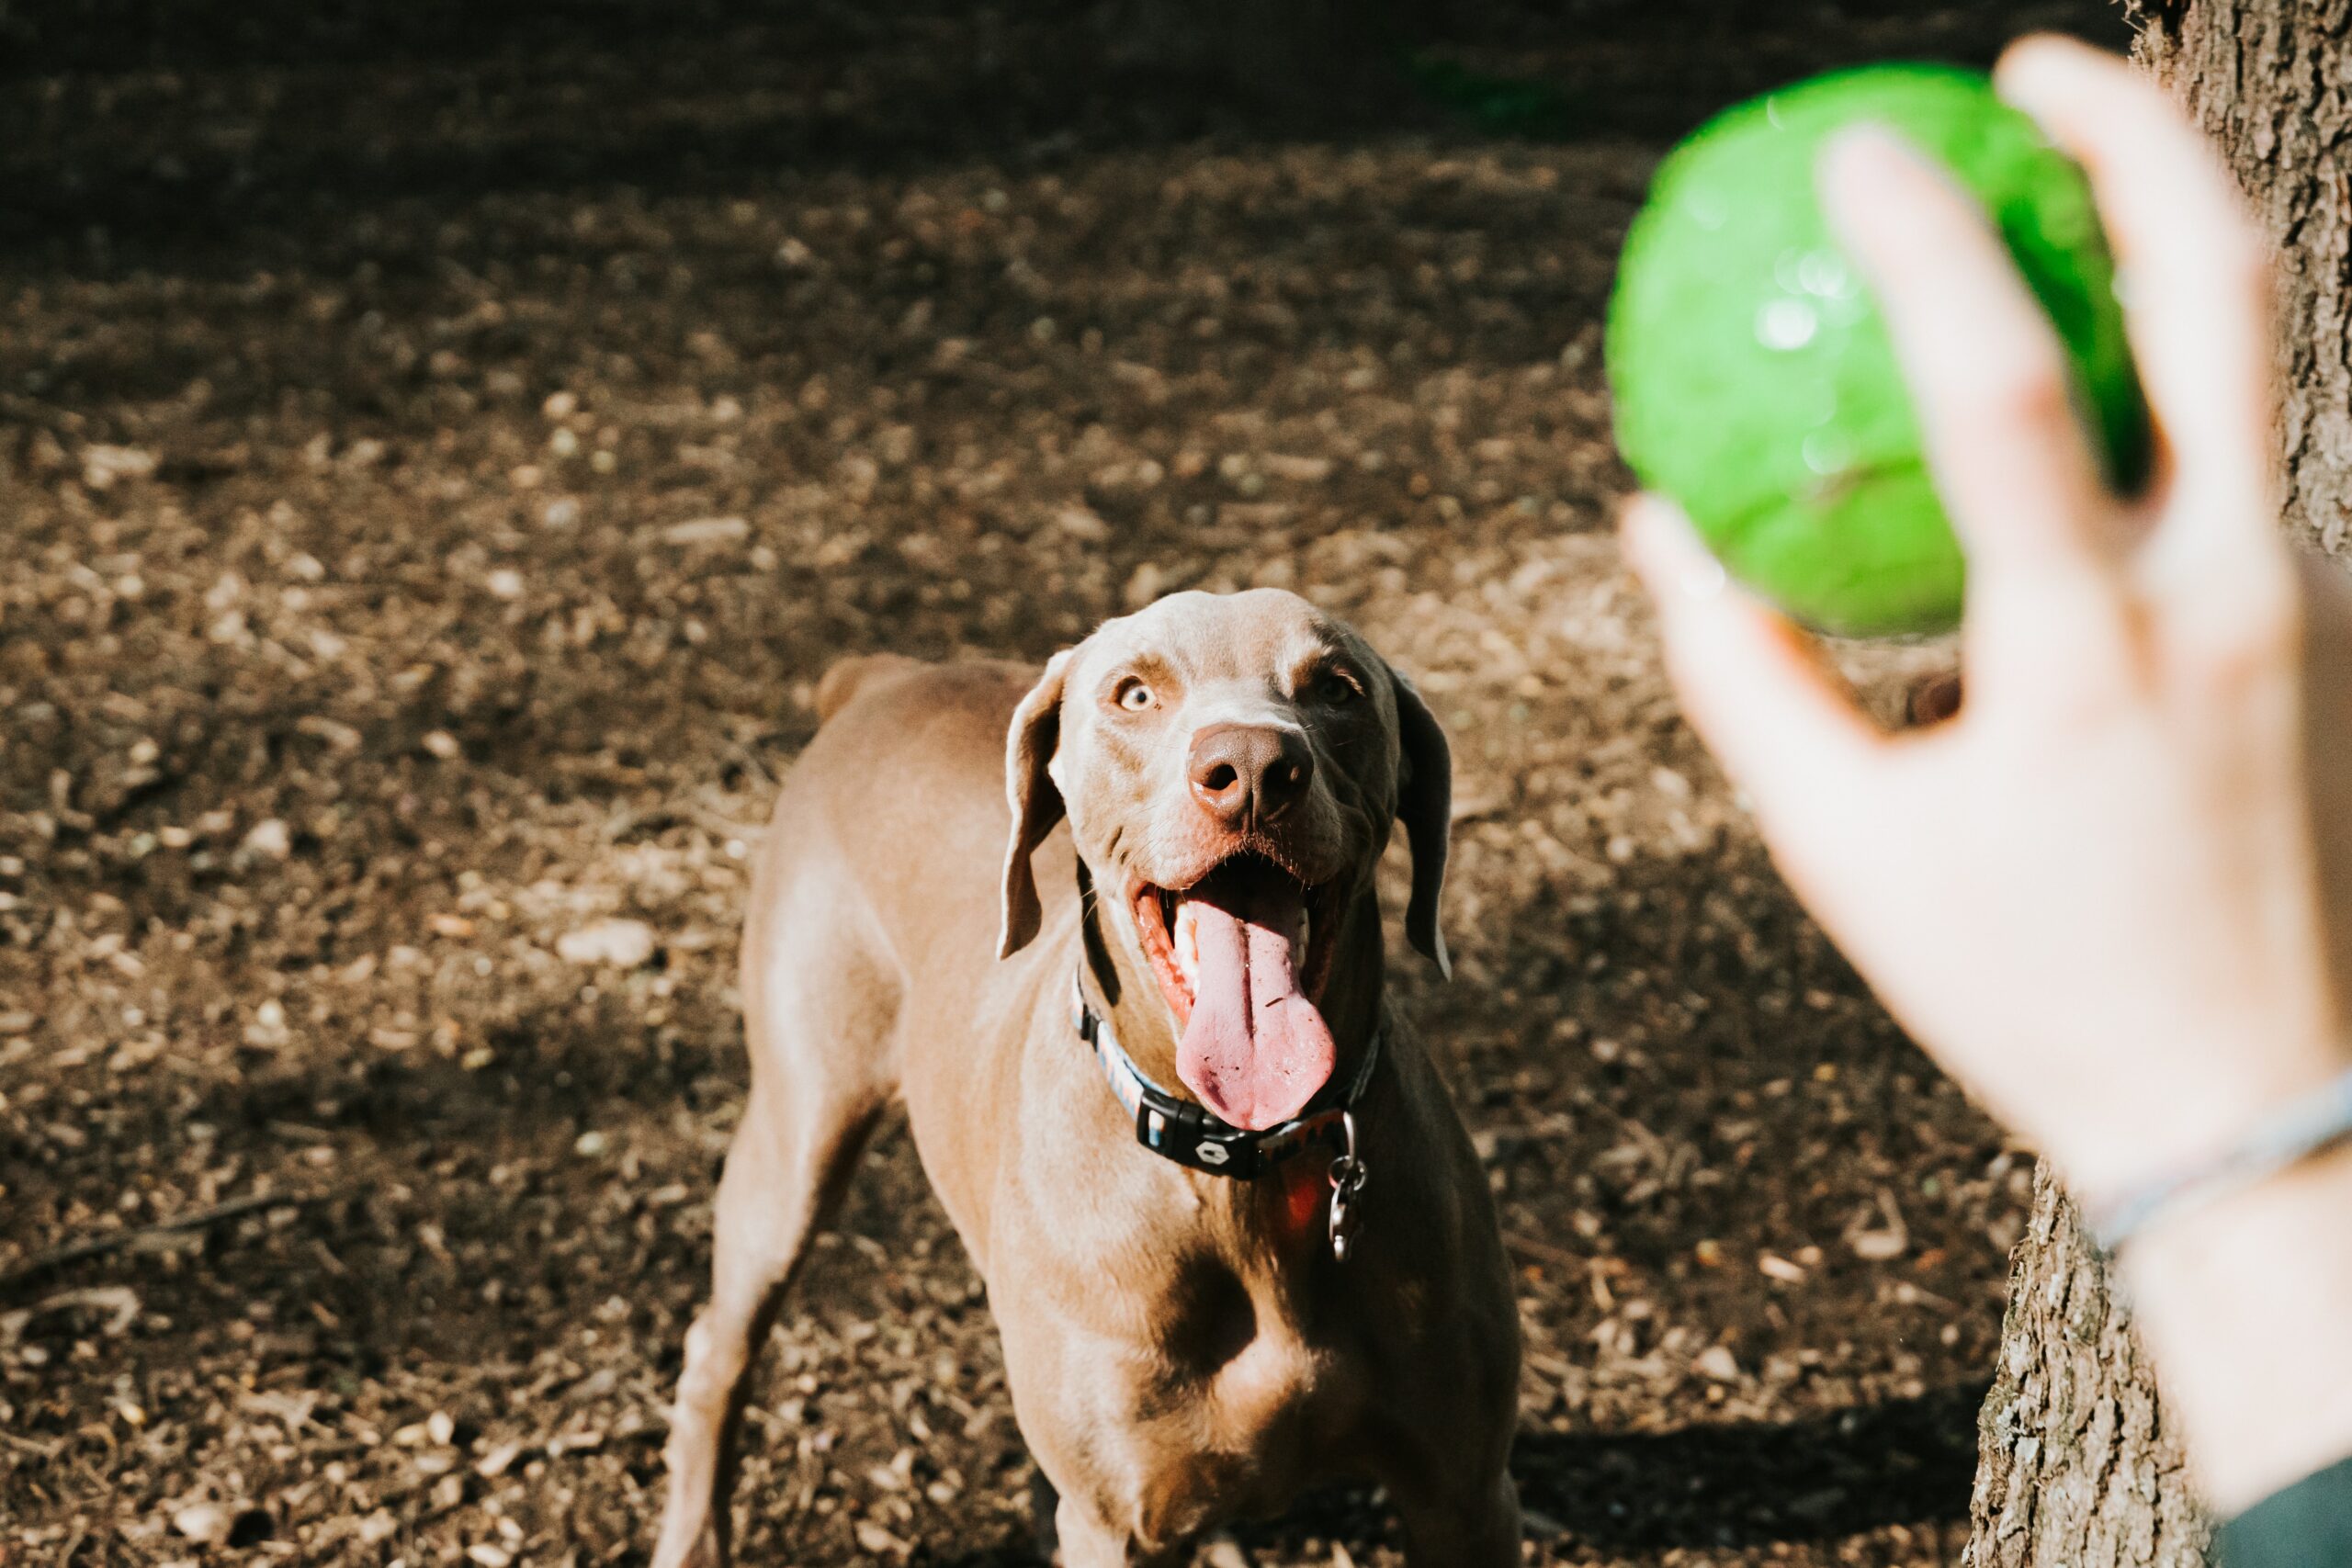 How to Play with Your Dog: Top Tips & Benefits